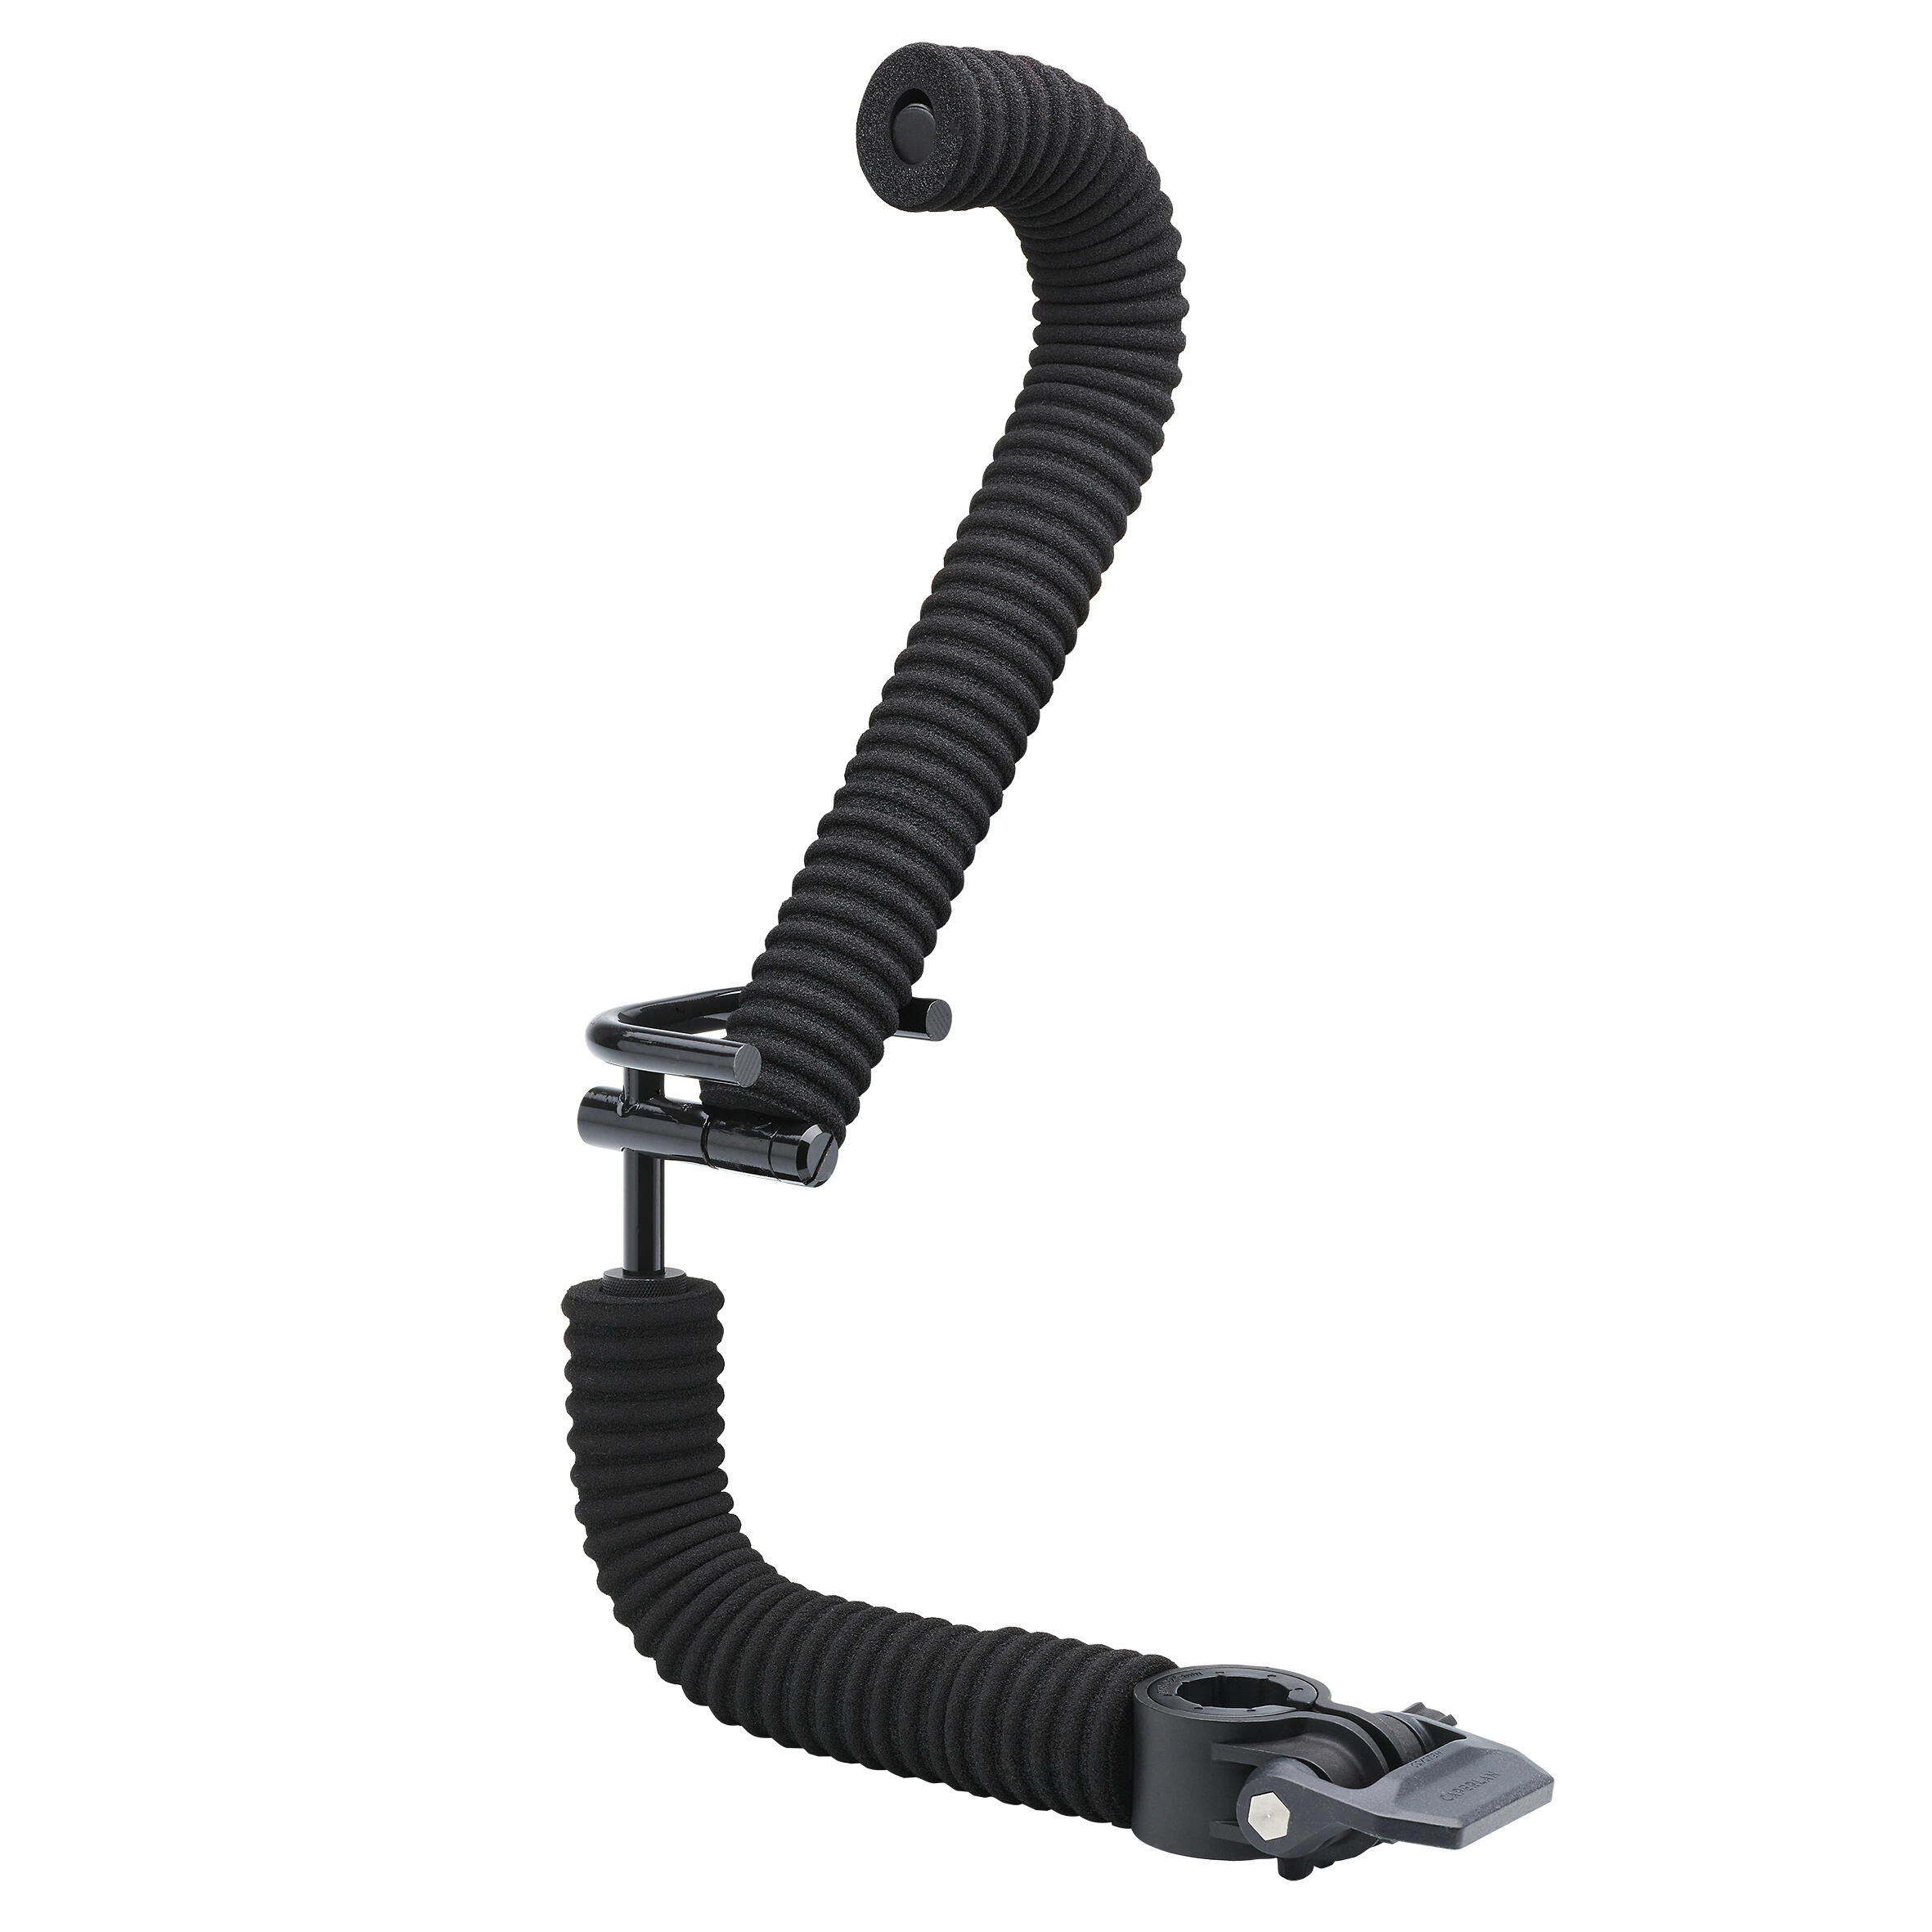 INNOVATIVE REAR ROD REST FOR CSB BPS D25 D36 FISHING STATIONS 3/5